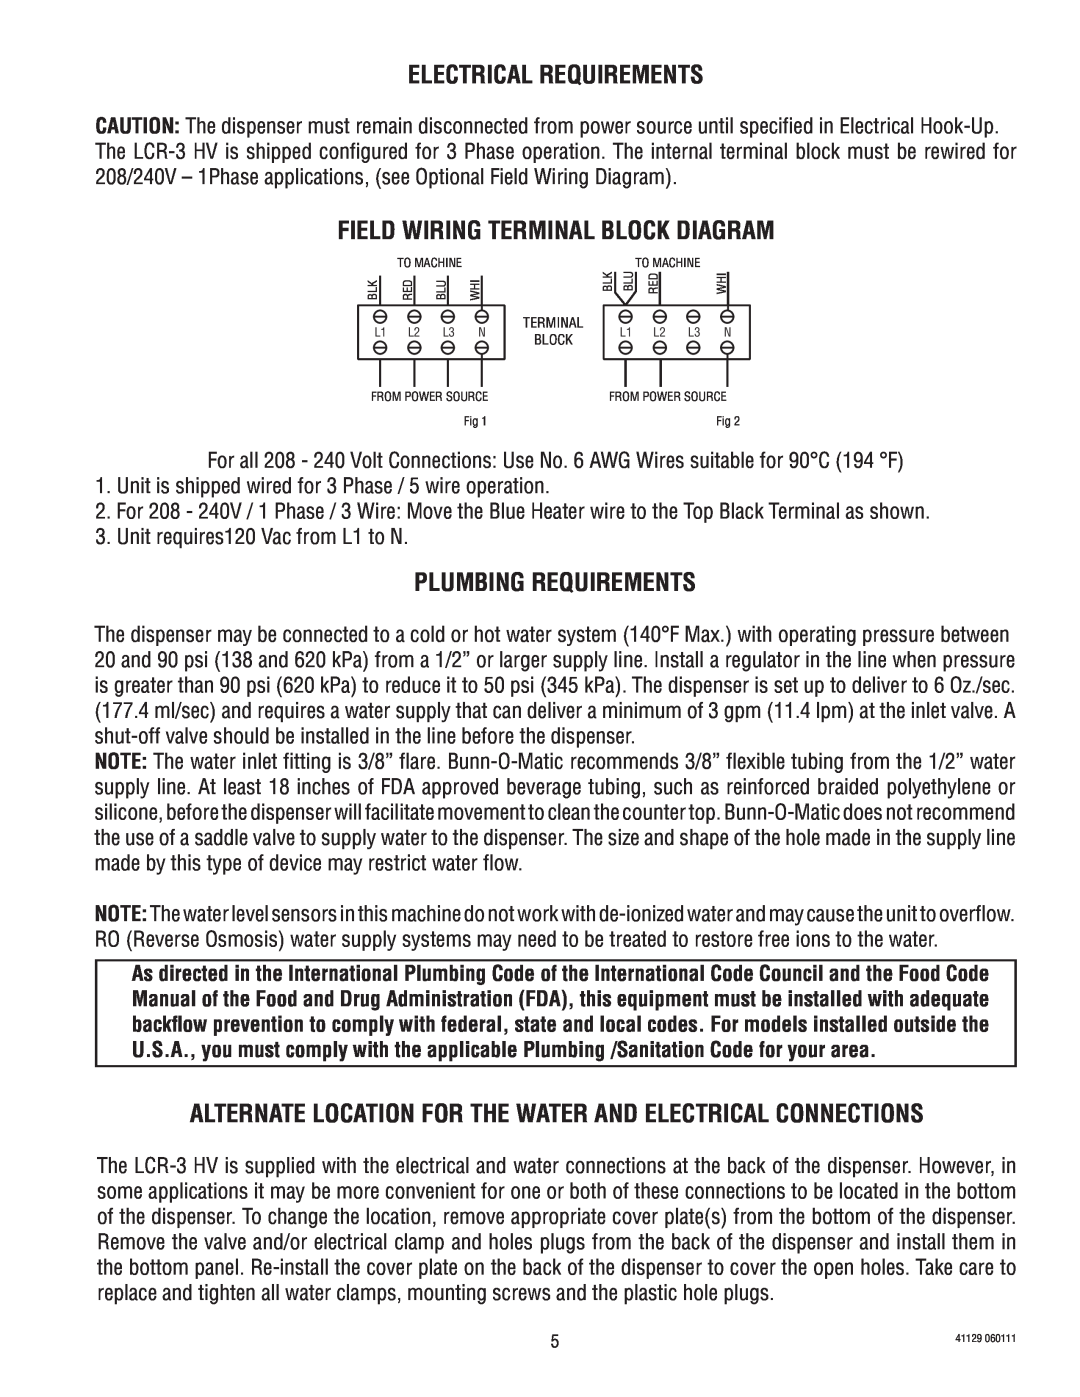 Bunn LCR-3 service manual Electrical Requirements, Field Wiring Terminal Block Diagram, Plumbing Requirements 